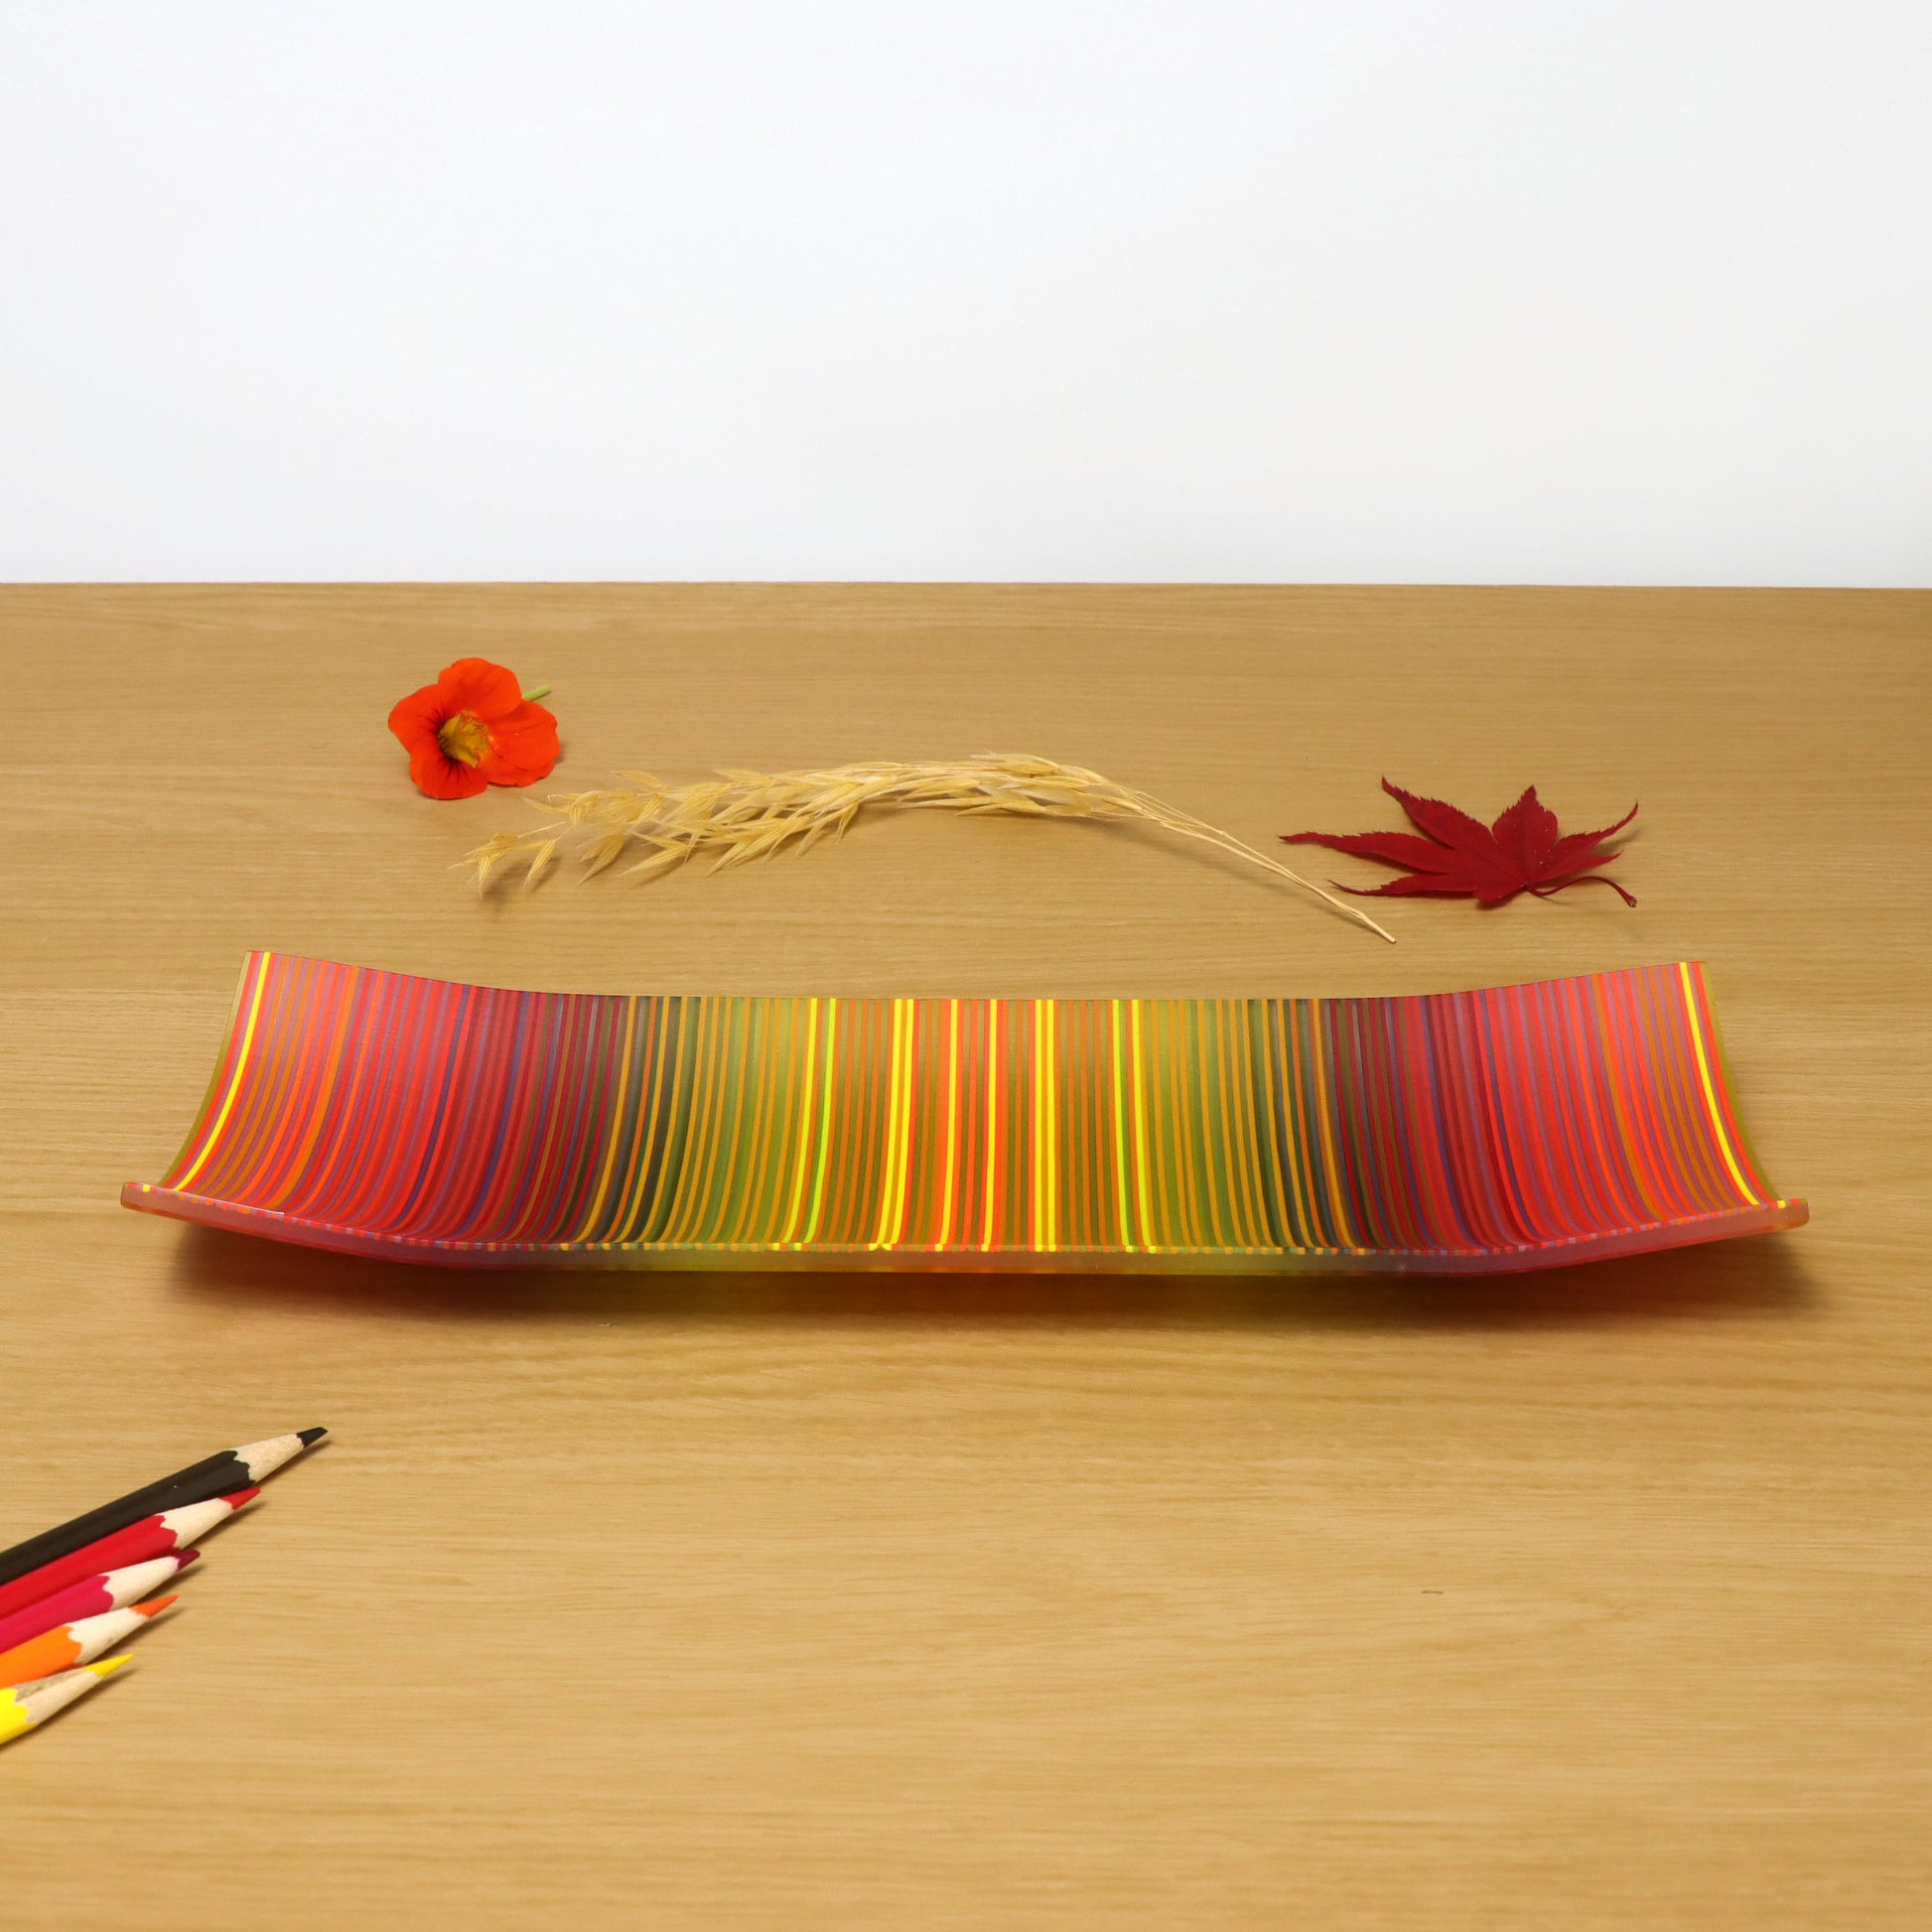 A vibrant ColourWave Glass fused glass plate with a dynamic spectrum of vertical stripes ranging from red to green. The plate’s corners elegantly curve upwards, adding a touch of sophistication. It is placed on a wooden surface, flanked by a single poppy flower to the left and a red maple leaf to the right, with a bundle of wheat stalks and four coloured pencils lying in front of it in harmonising colours.